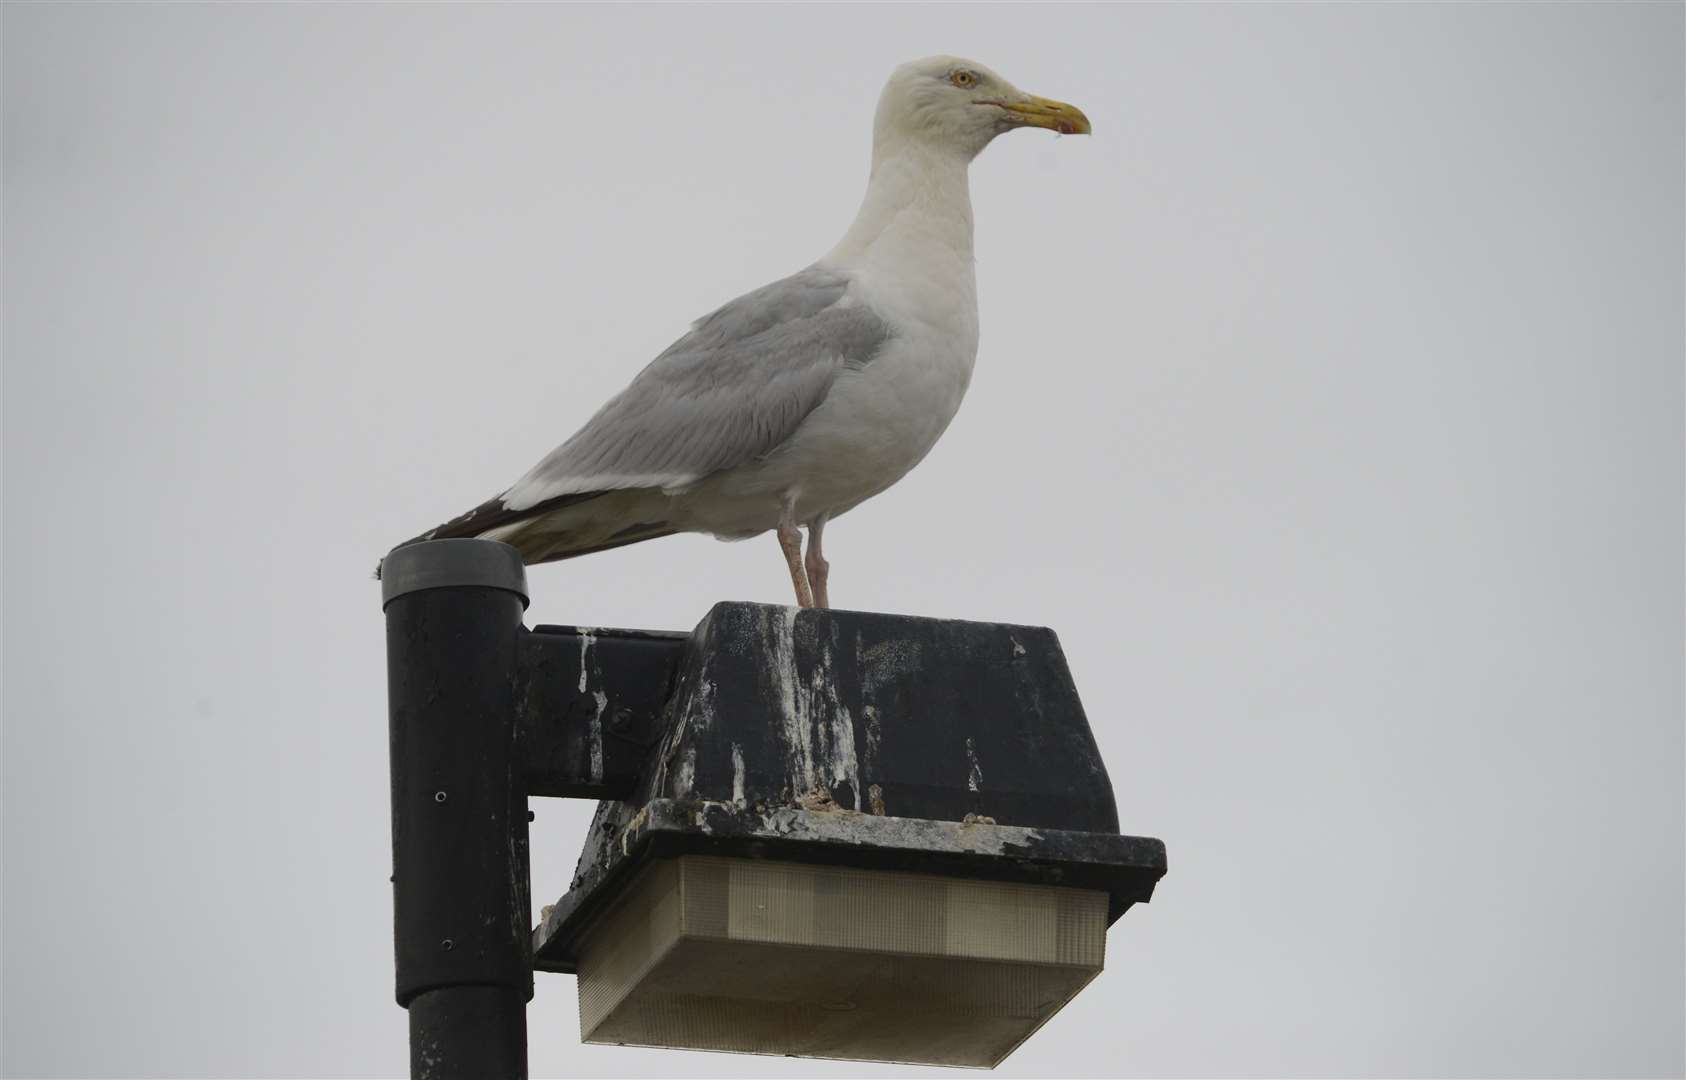 A seagull at the top of the Edinburgh Road car park